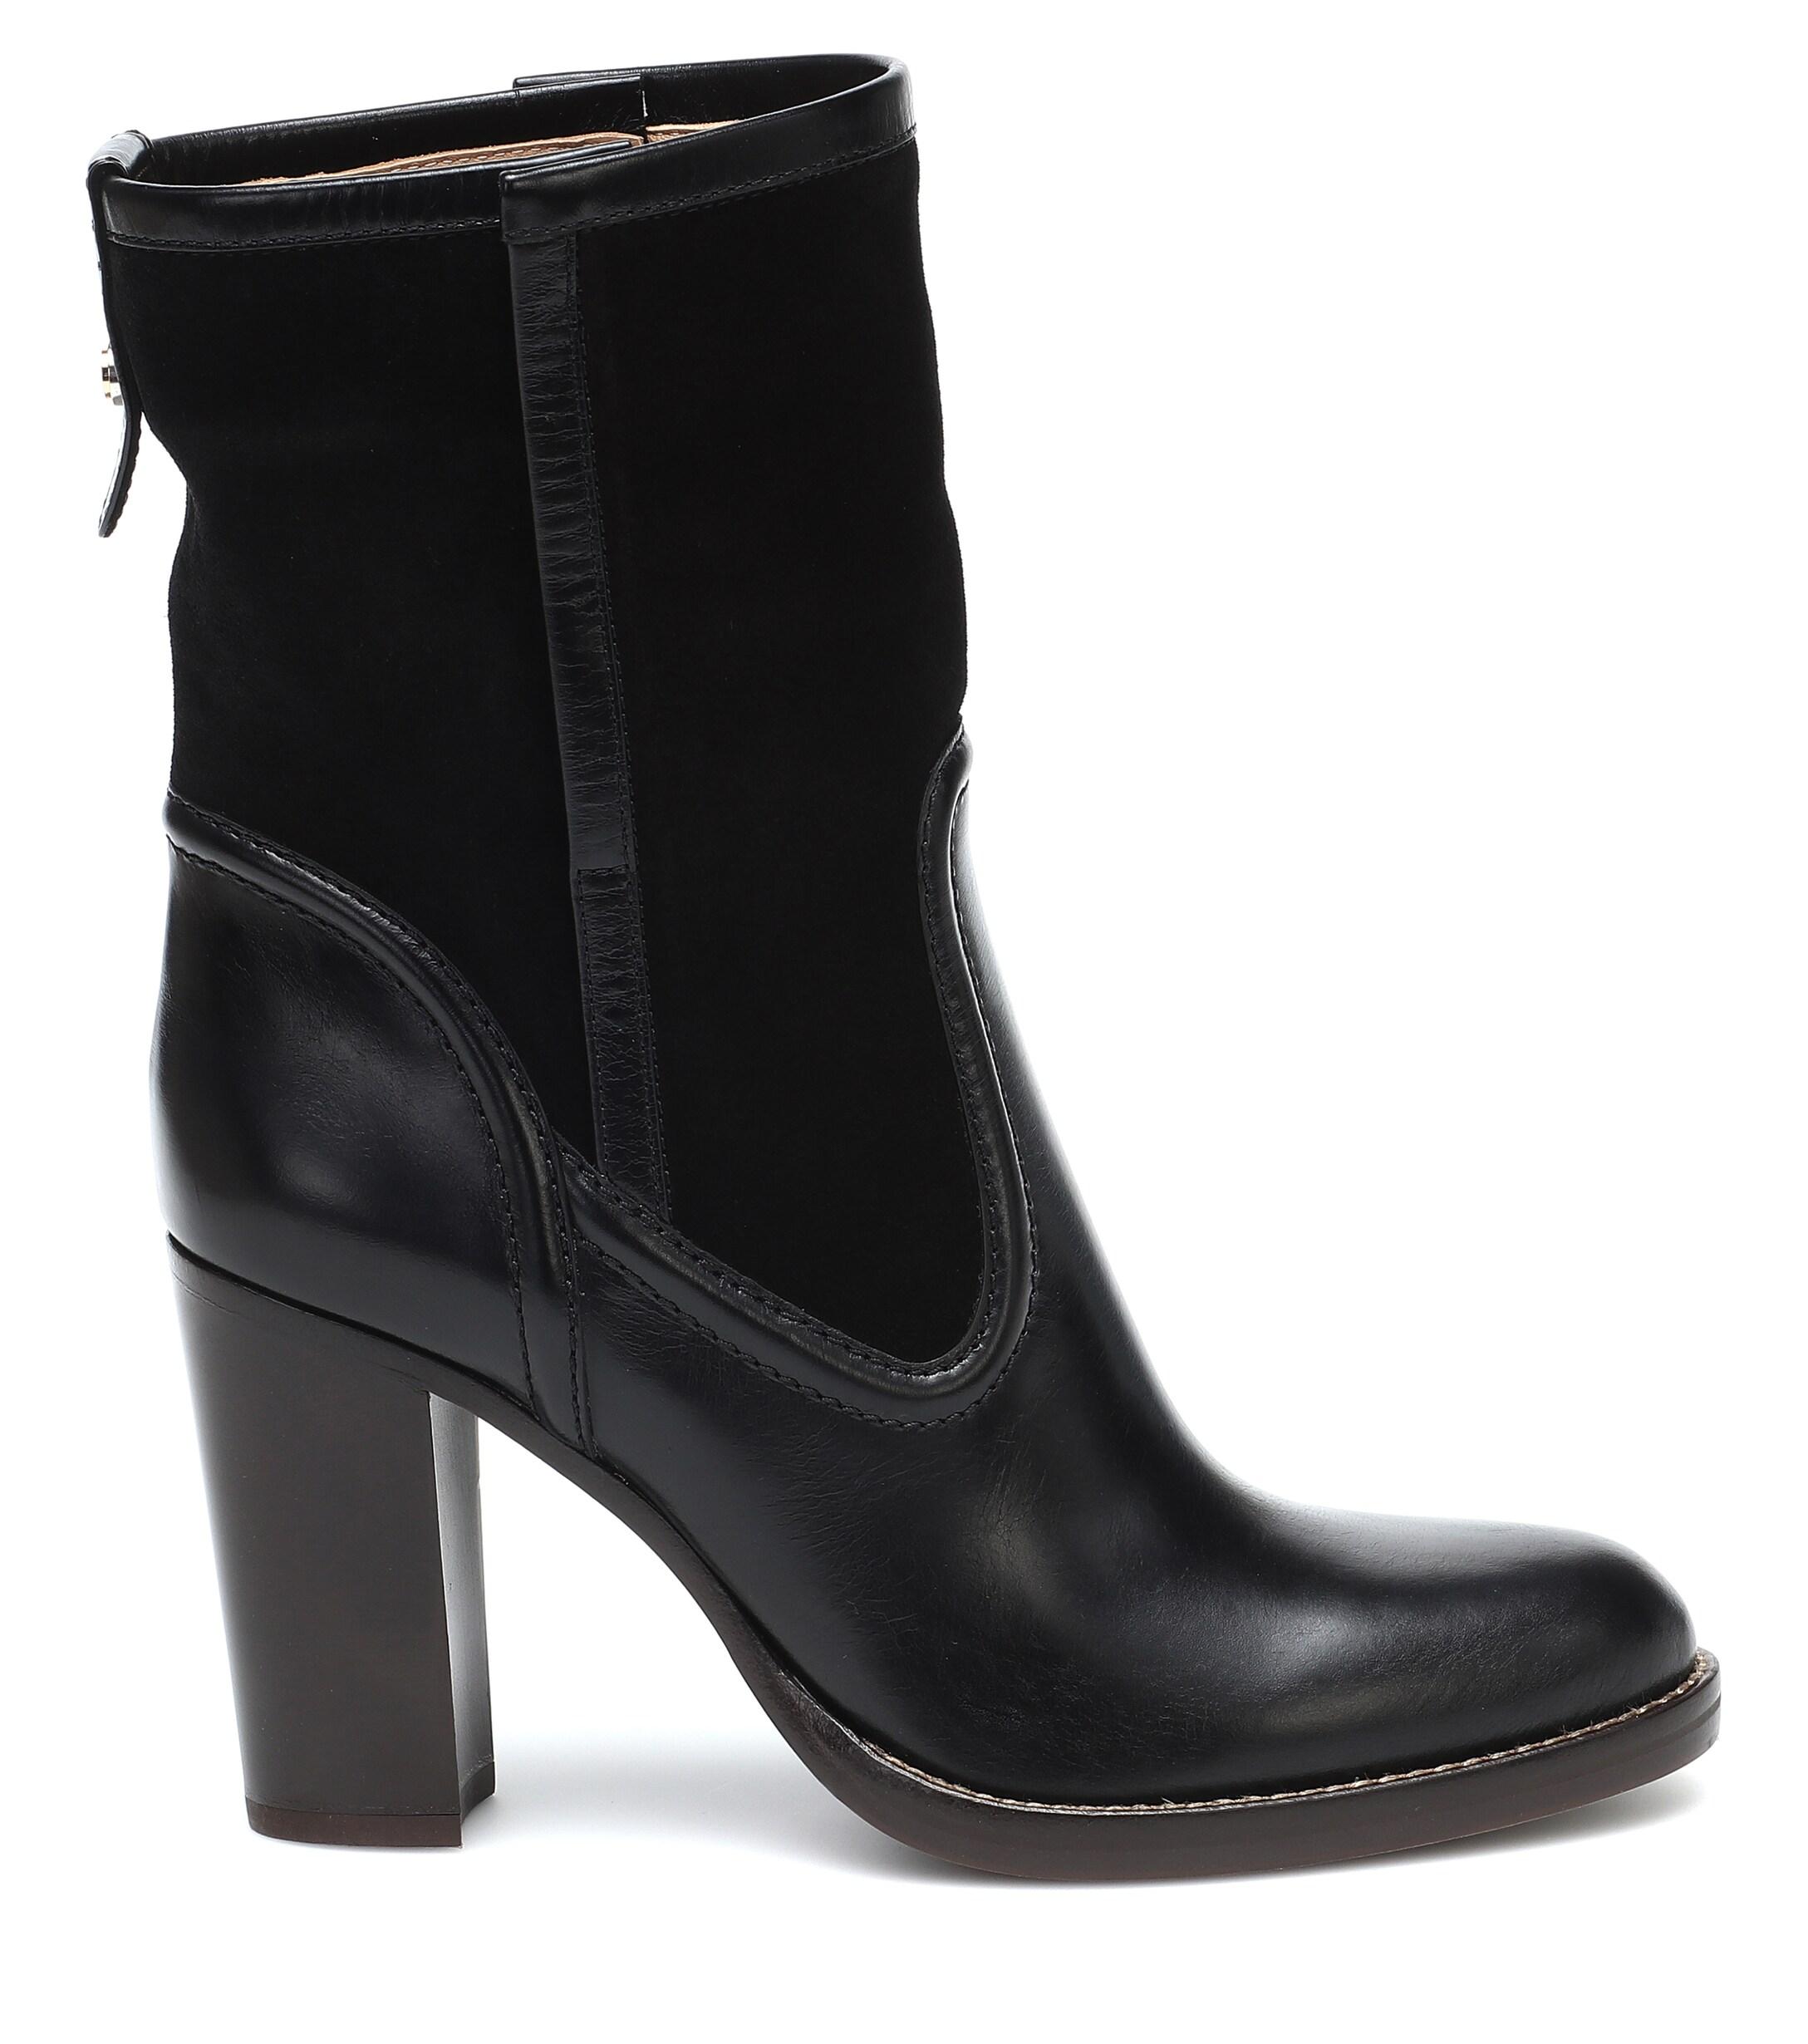 Chloé Leather And Suede Ankle Boots in Black - Lyst